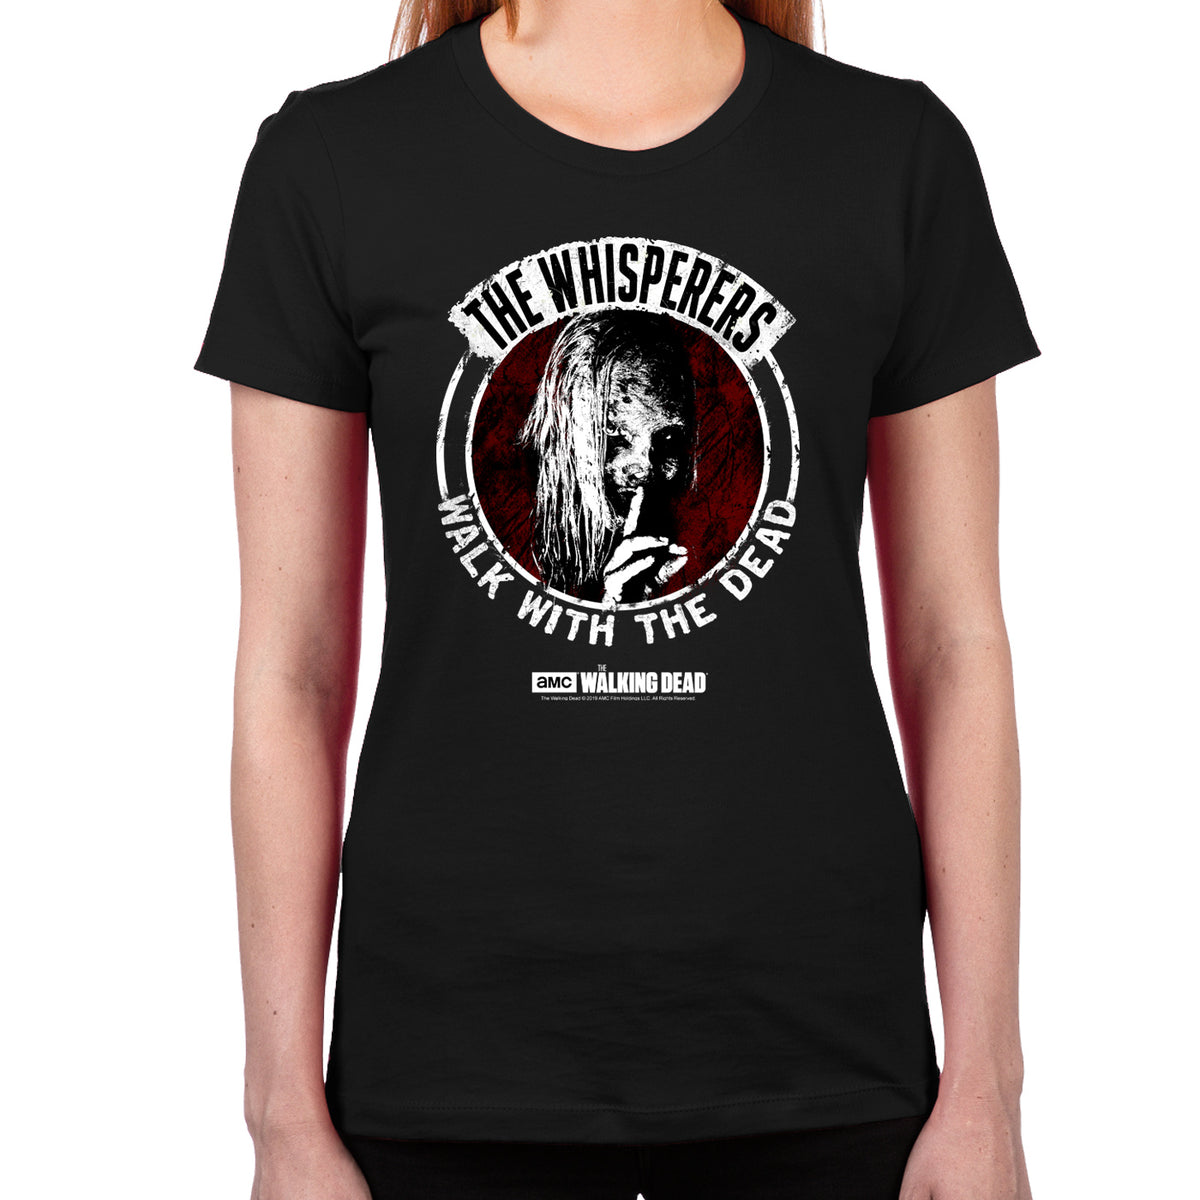 Whisperers Walk With The Dead Women's T-Shirt